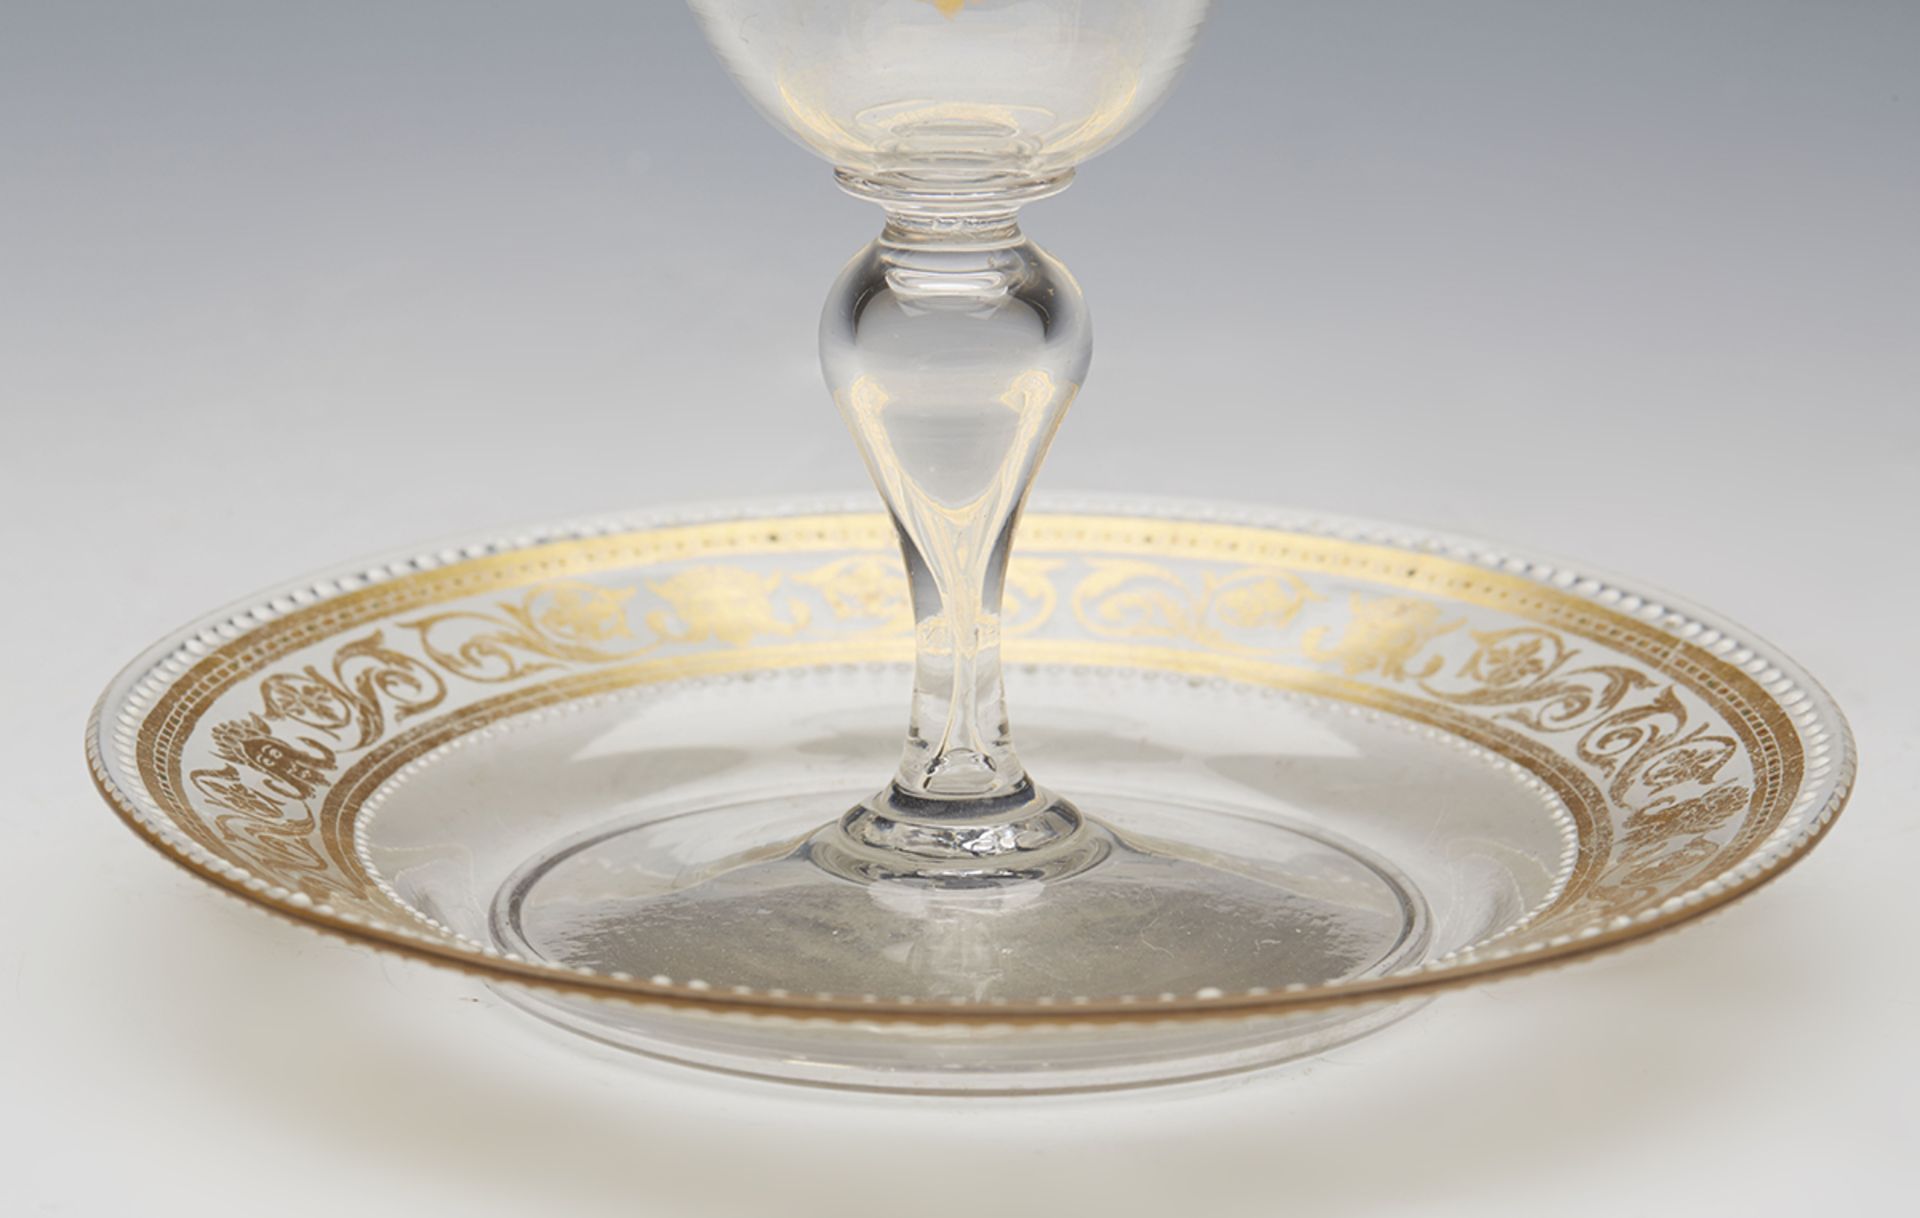 Vintage Venetian Gilded Wine Glass And Stand With Monogram 19/20Th C. - Image 3 of 8